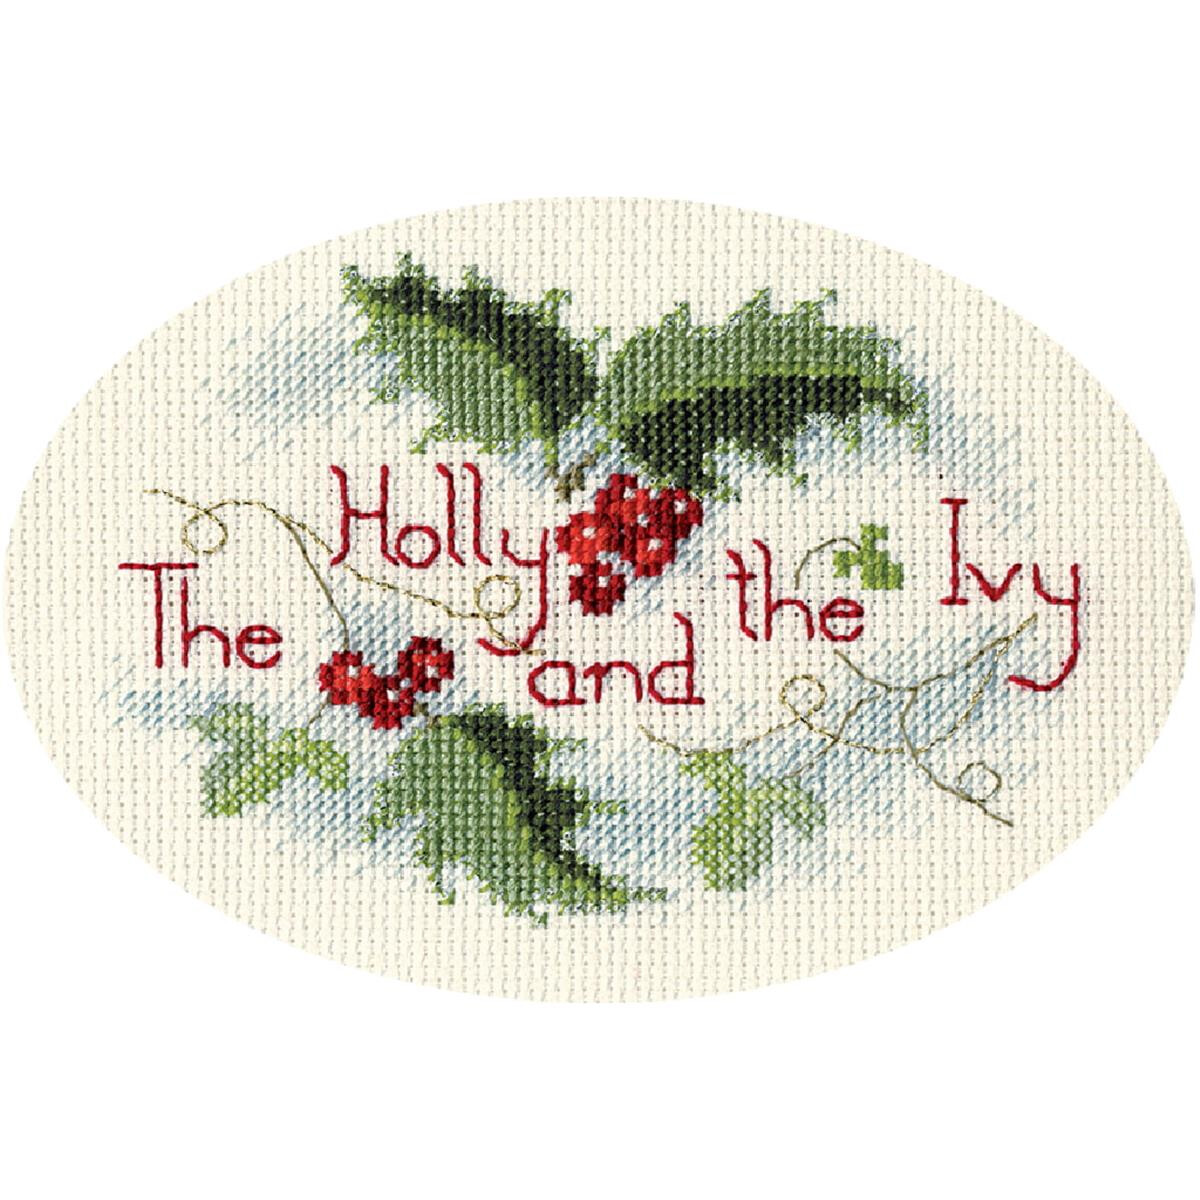 An oval cross-stitch design with the text The holly and...